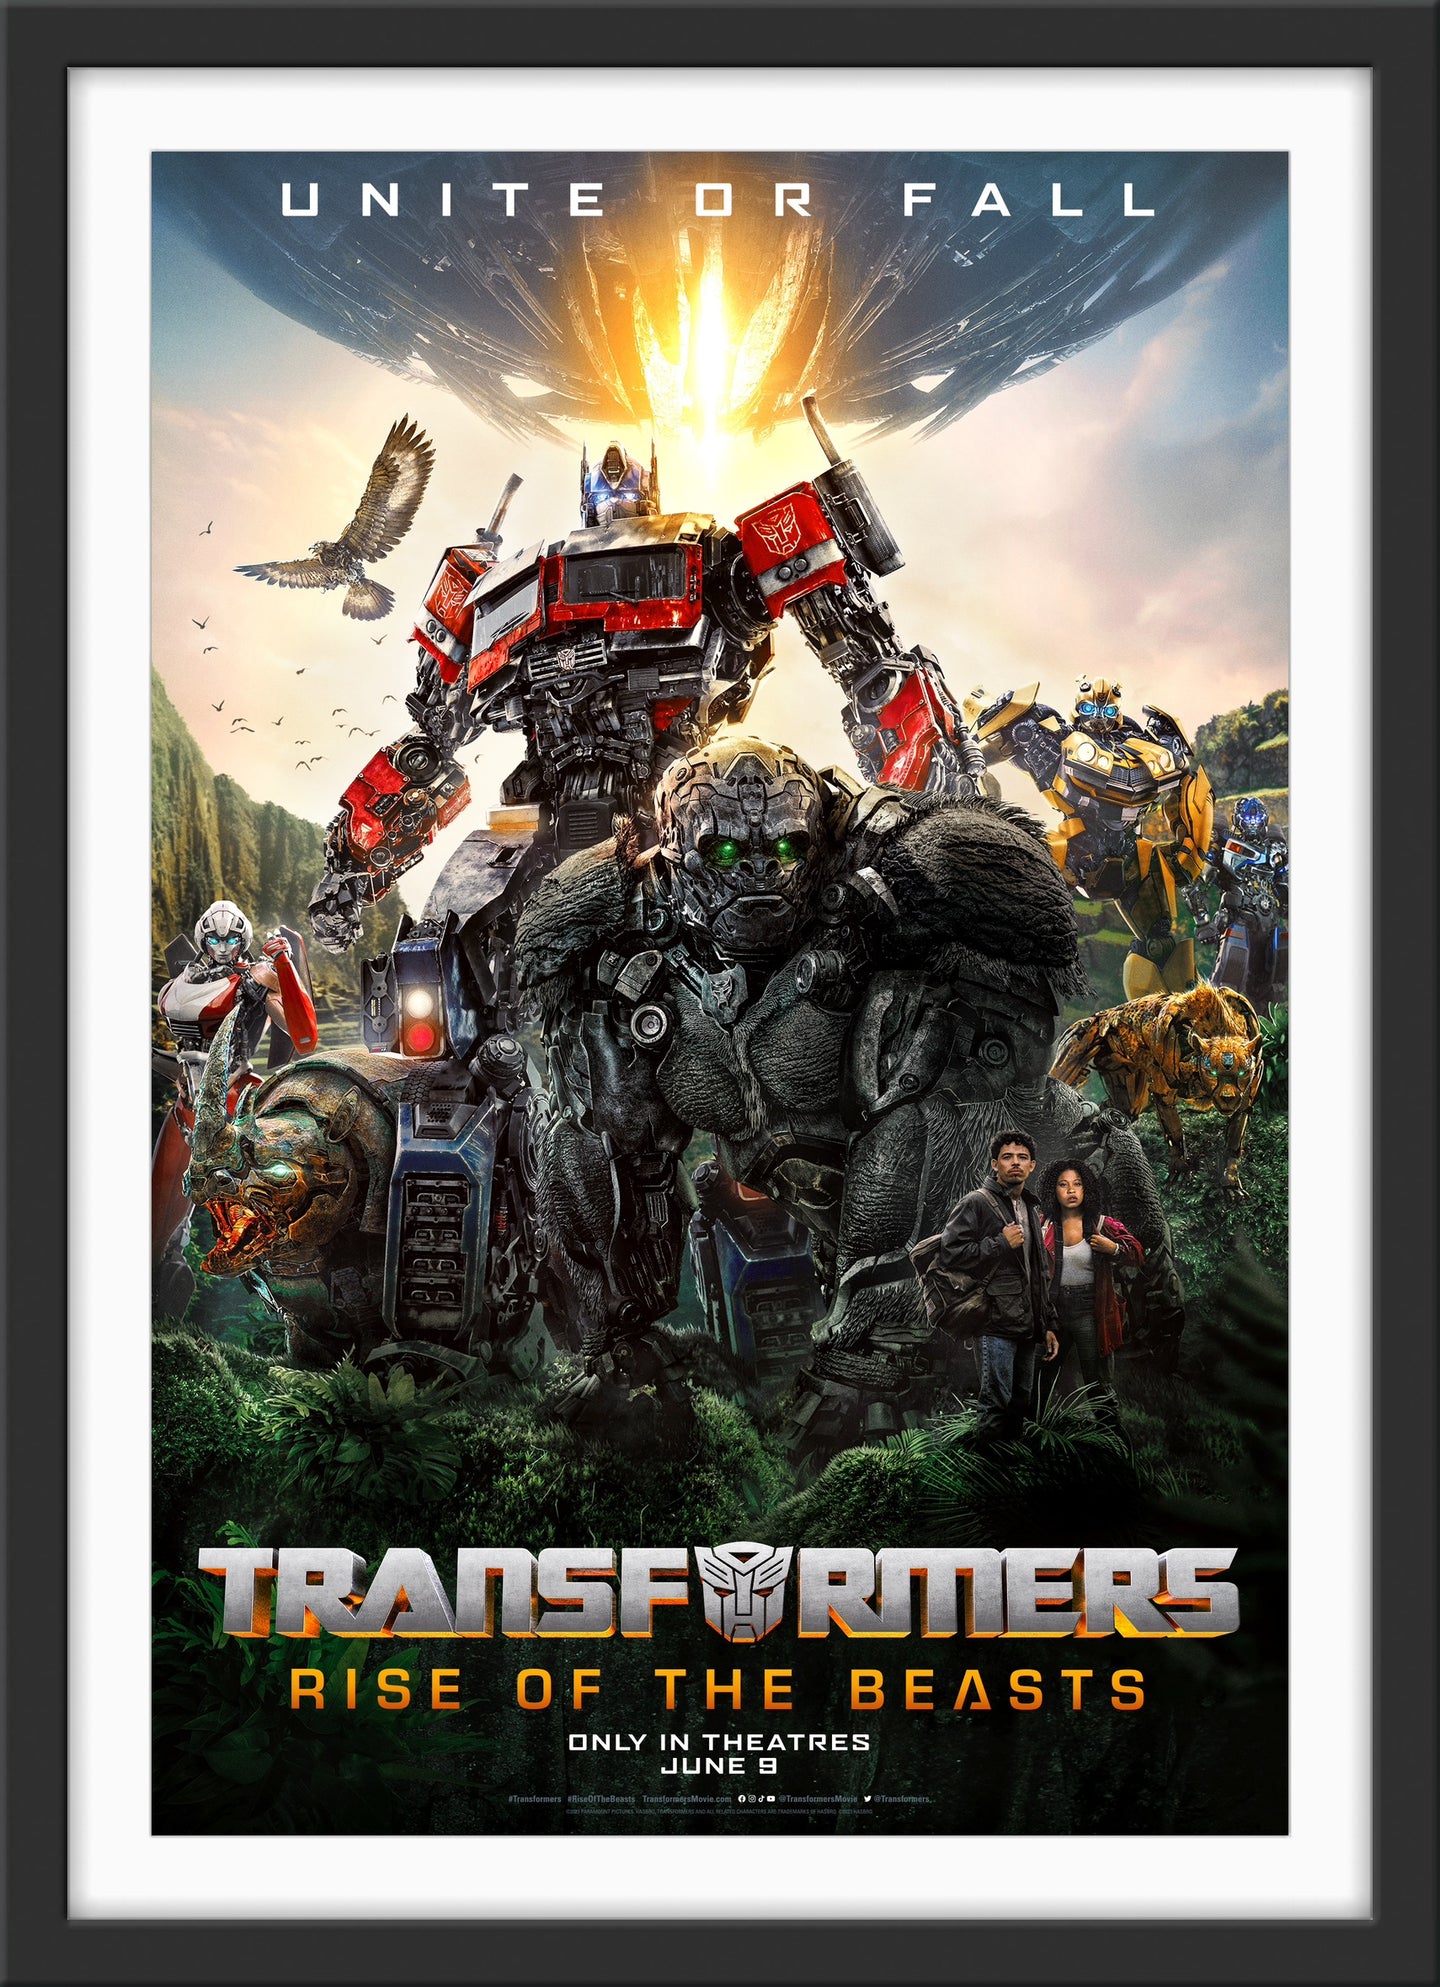 An original movie poster for the film Transformers Rise of the Beasts